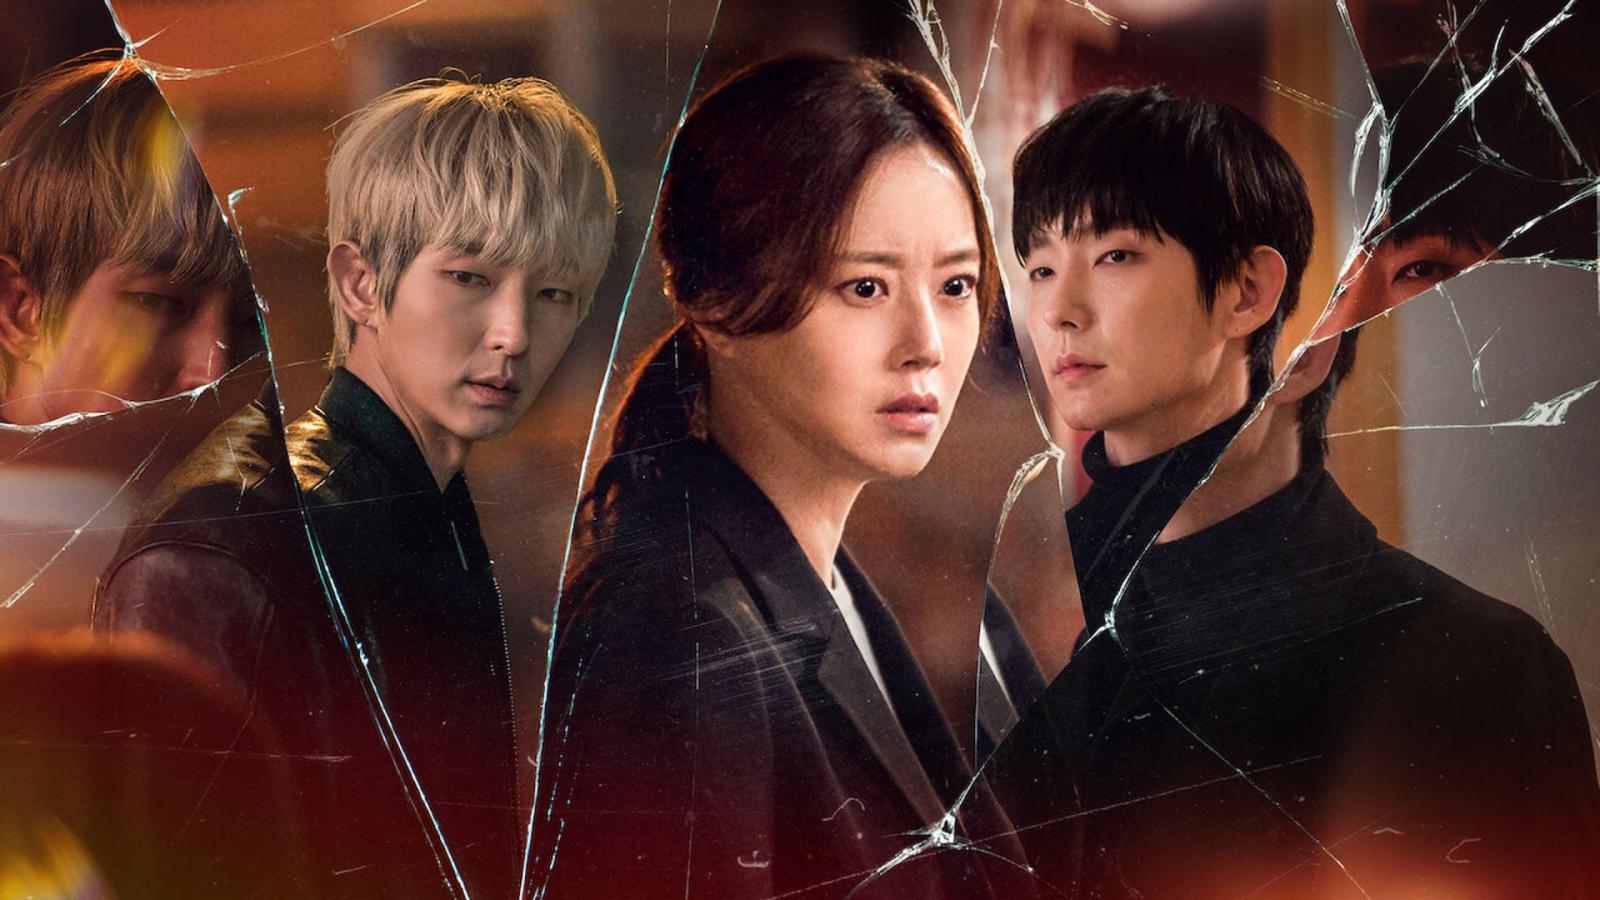 10 Chilling Korean Dramas About Serial Killers Ranked From Worst To Best